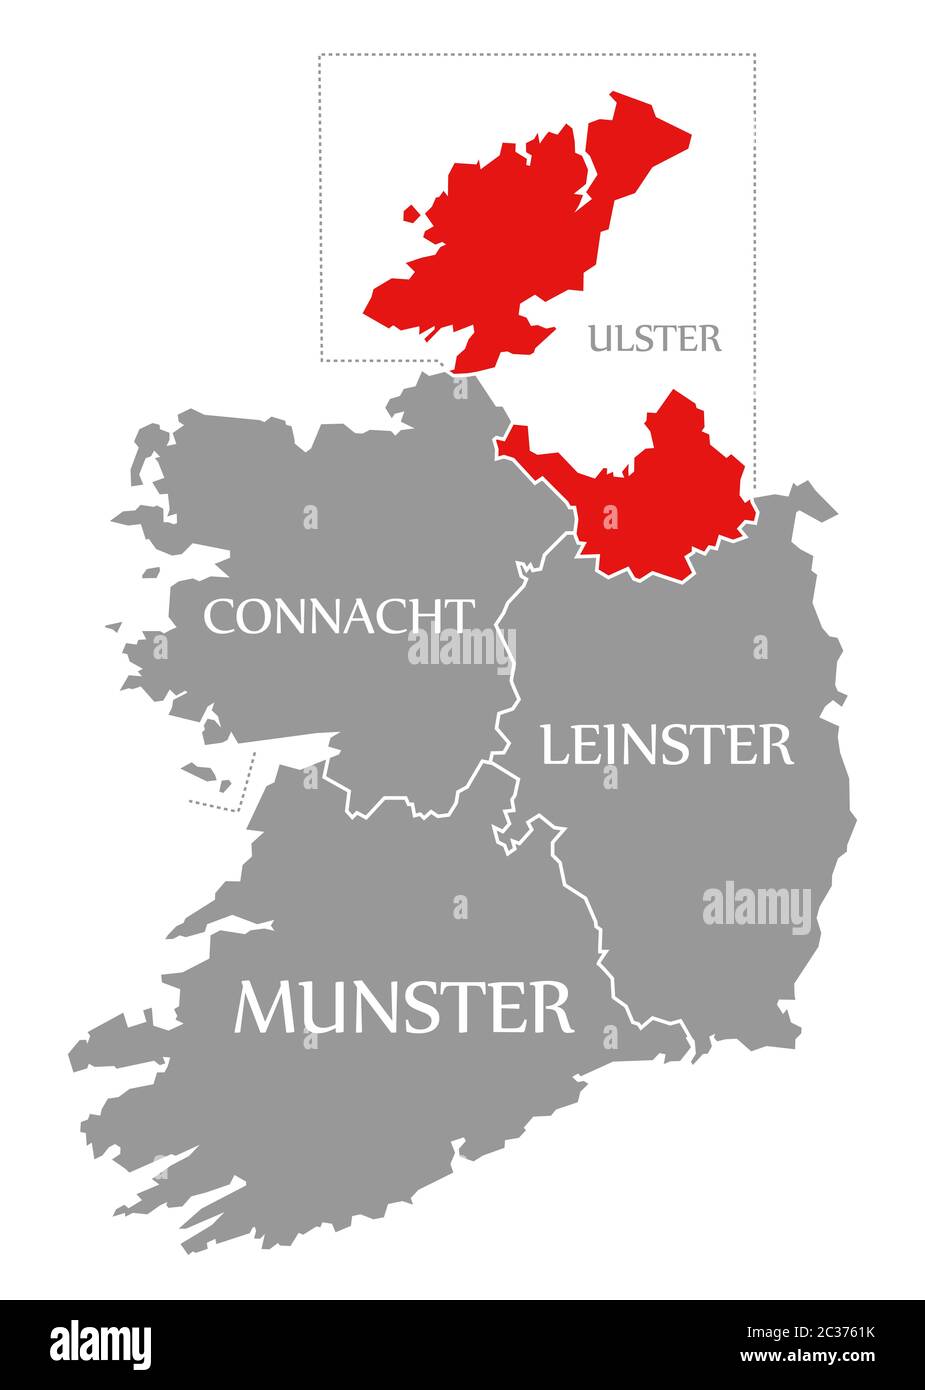 Ulster red highlighted in map of Ireland Stock Photo